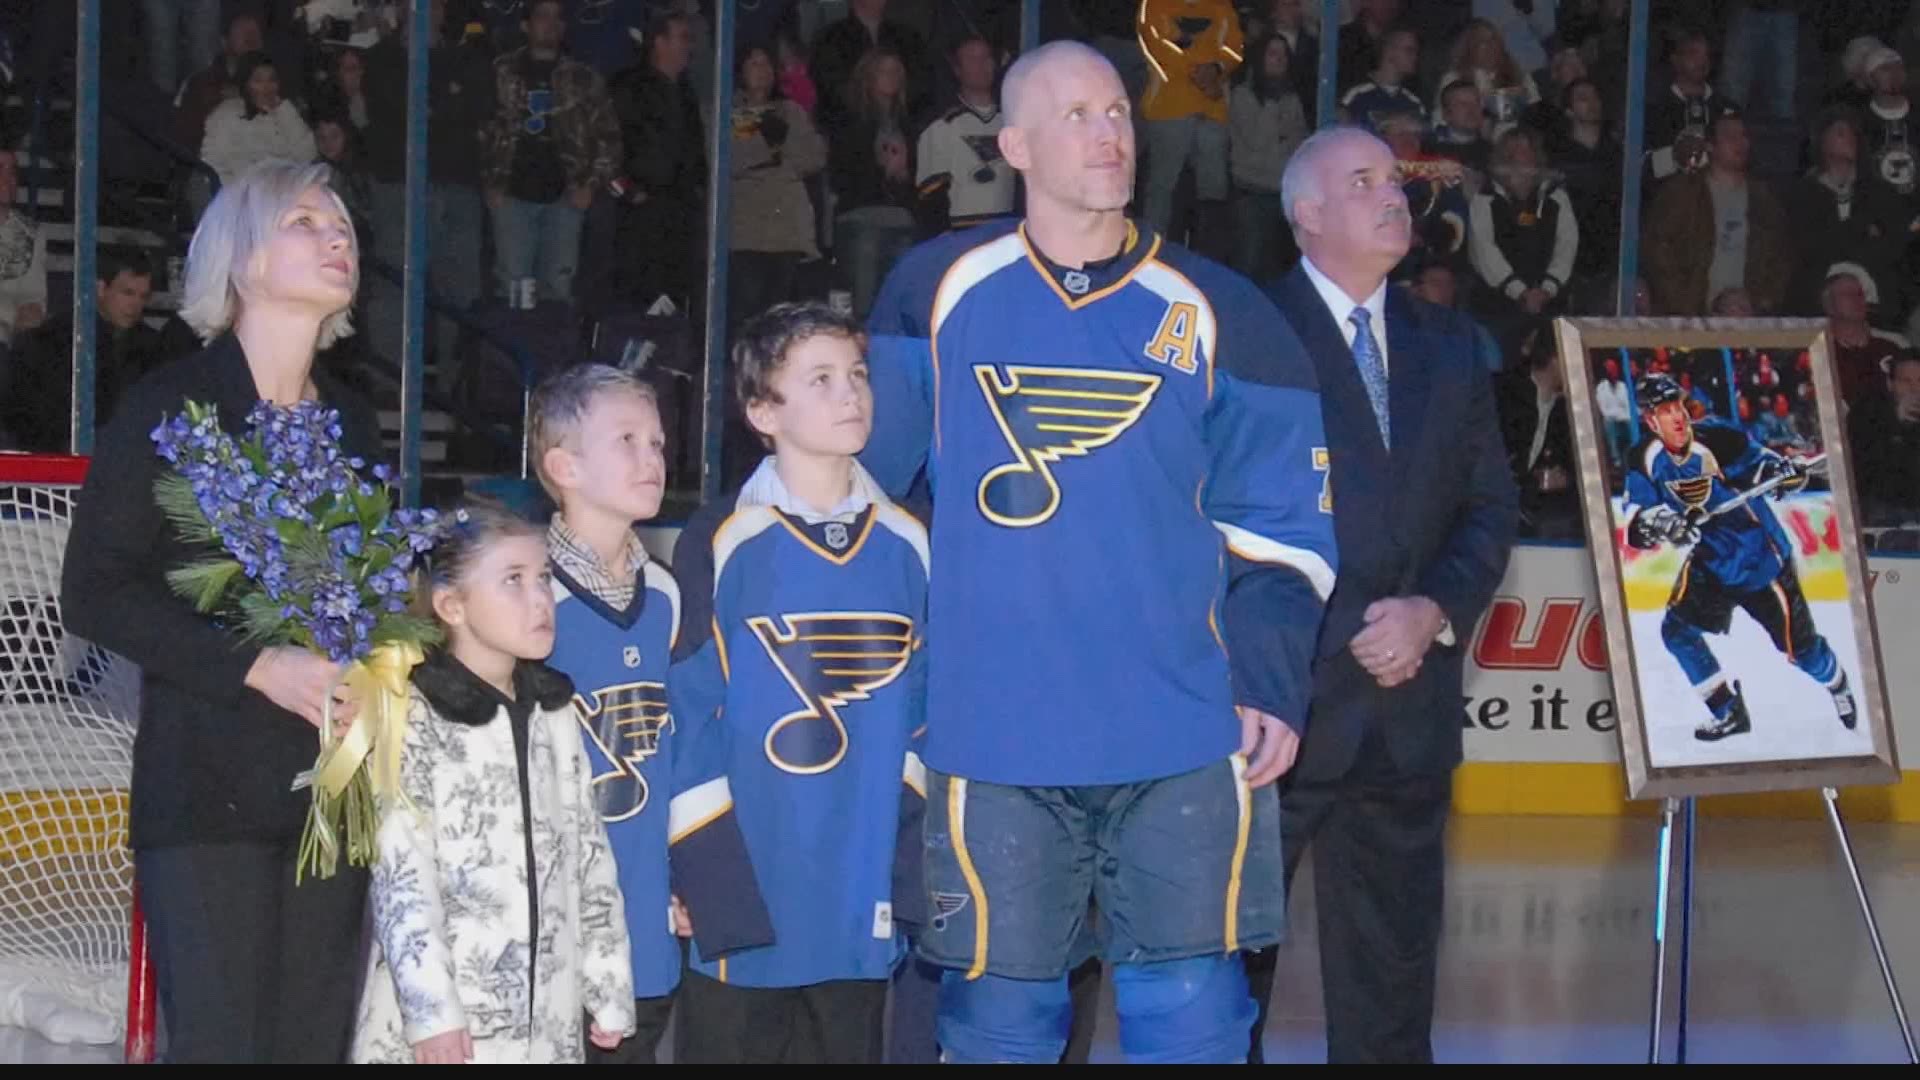 When you think St. Louis hockey families, you think Tkachuk.